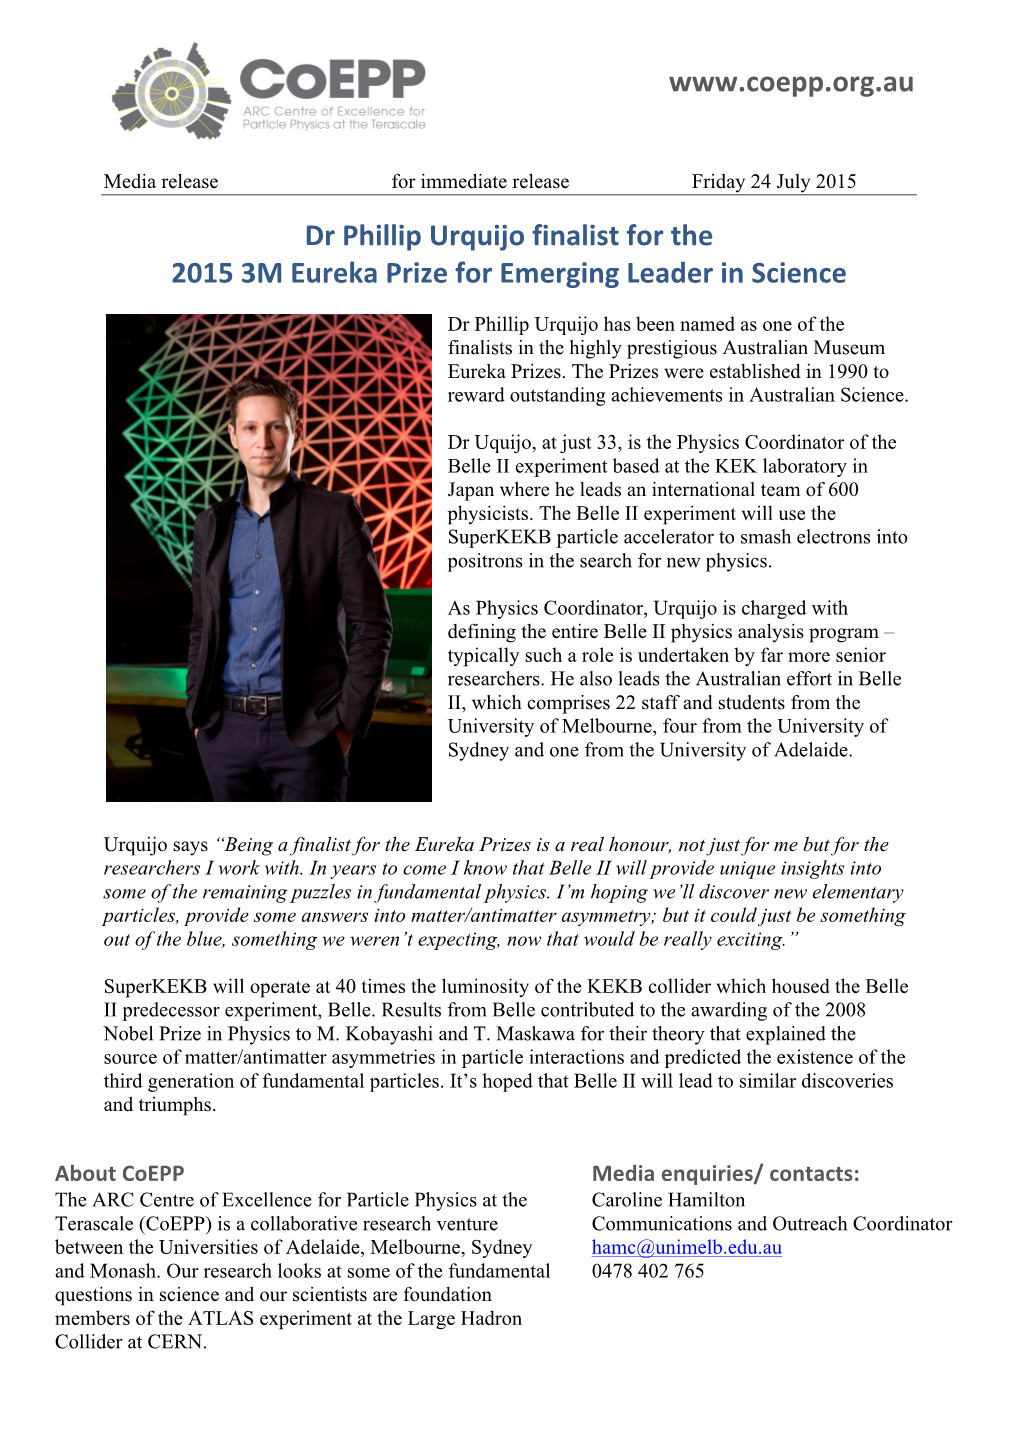 Dr Phillip Urquijo Finalist for the 2015 3M Eureka Prize for Emerging Leader in Science